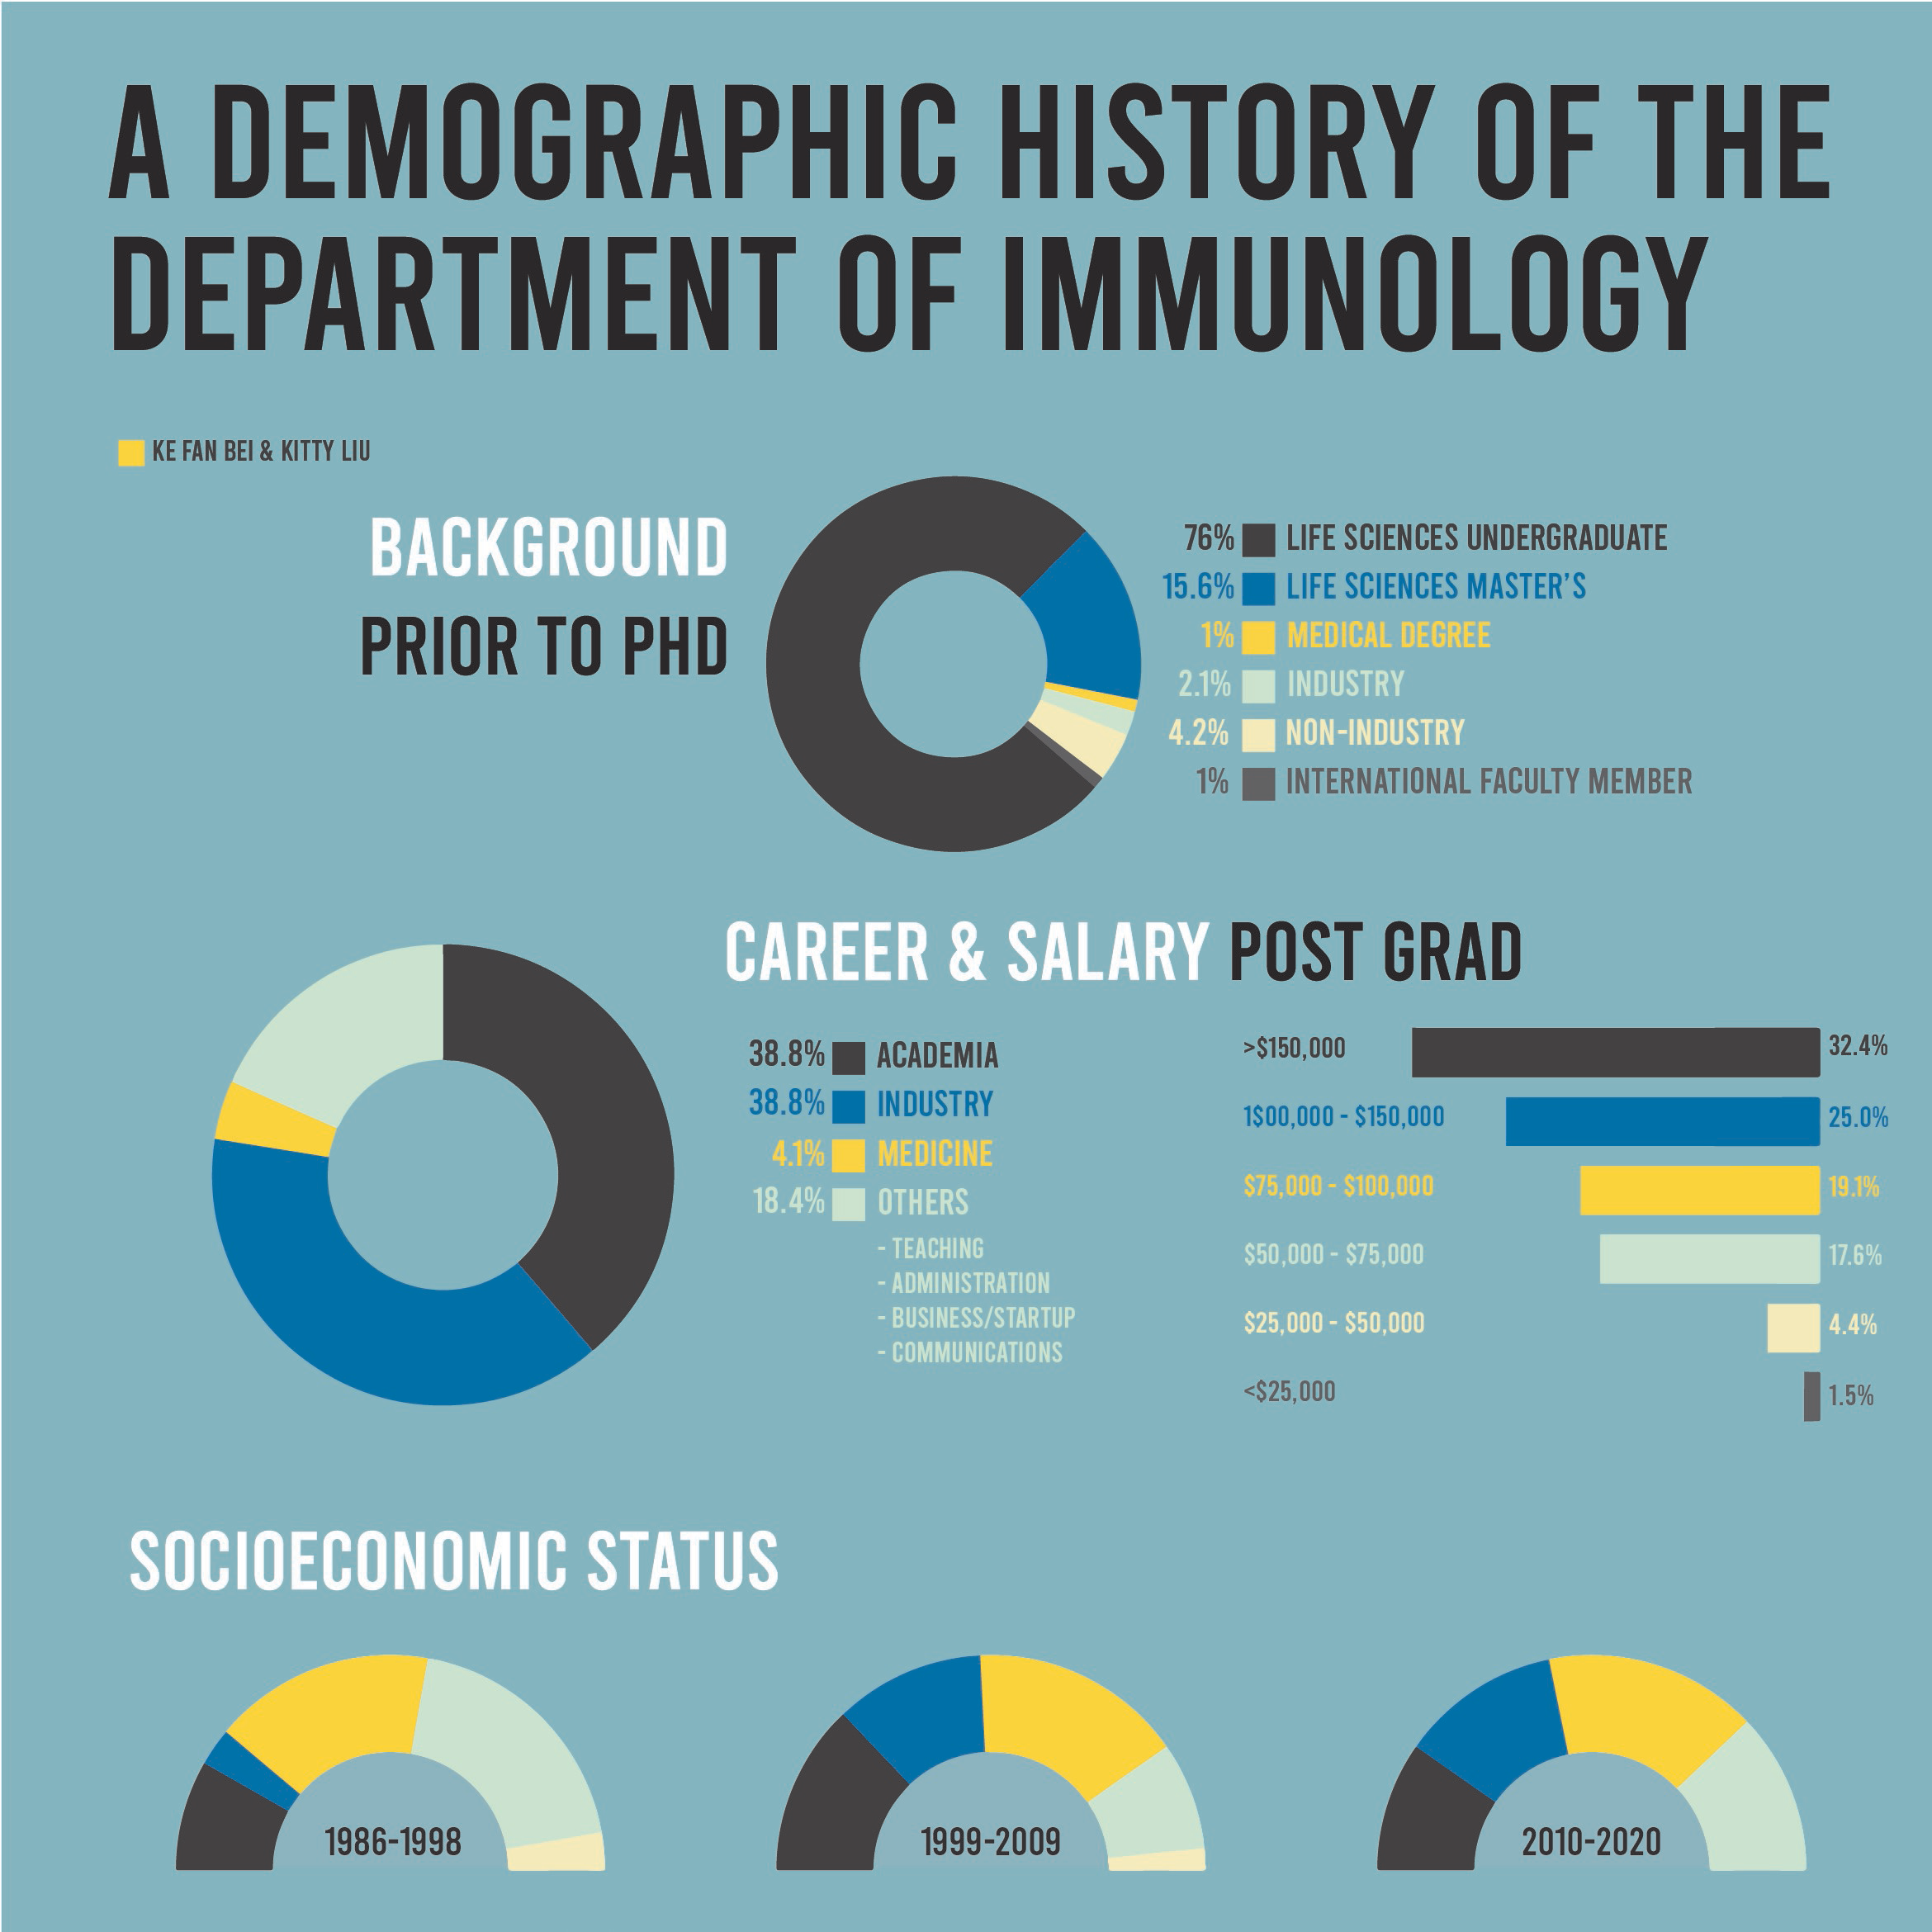 A Demographic History of the Department of Immunology